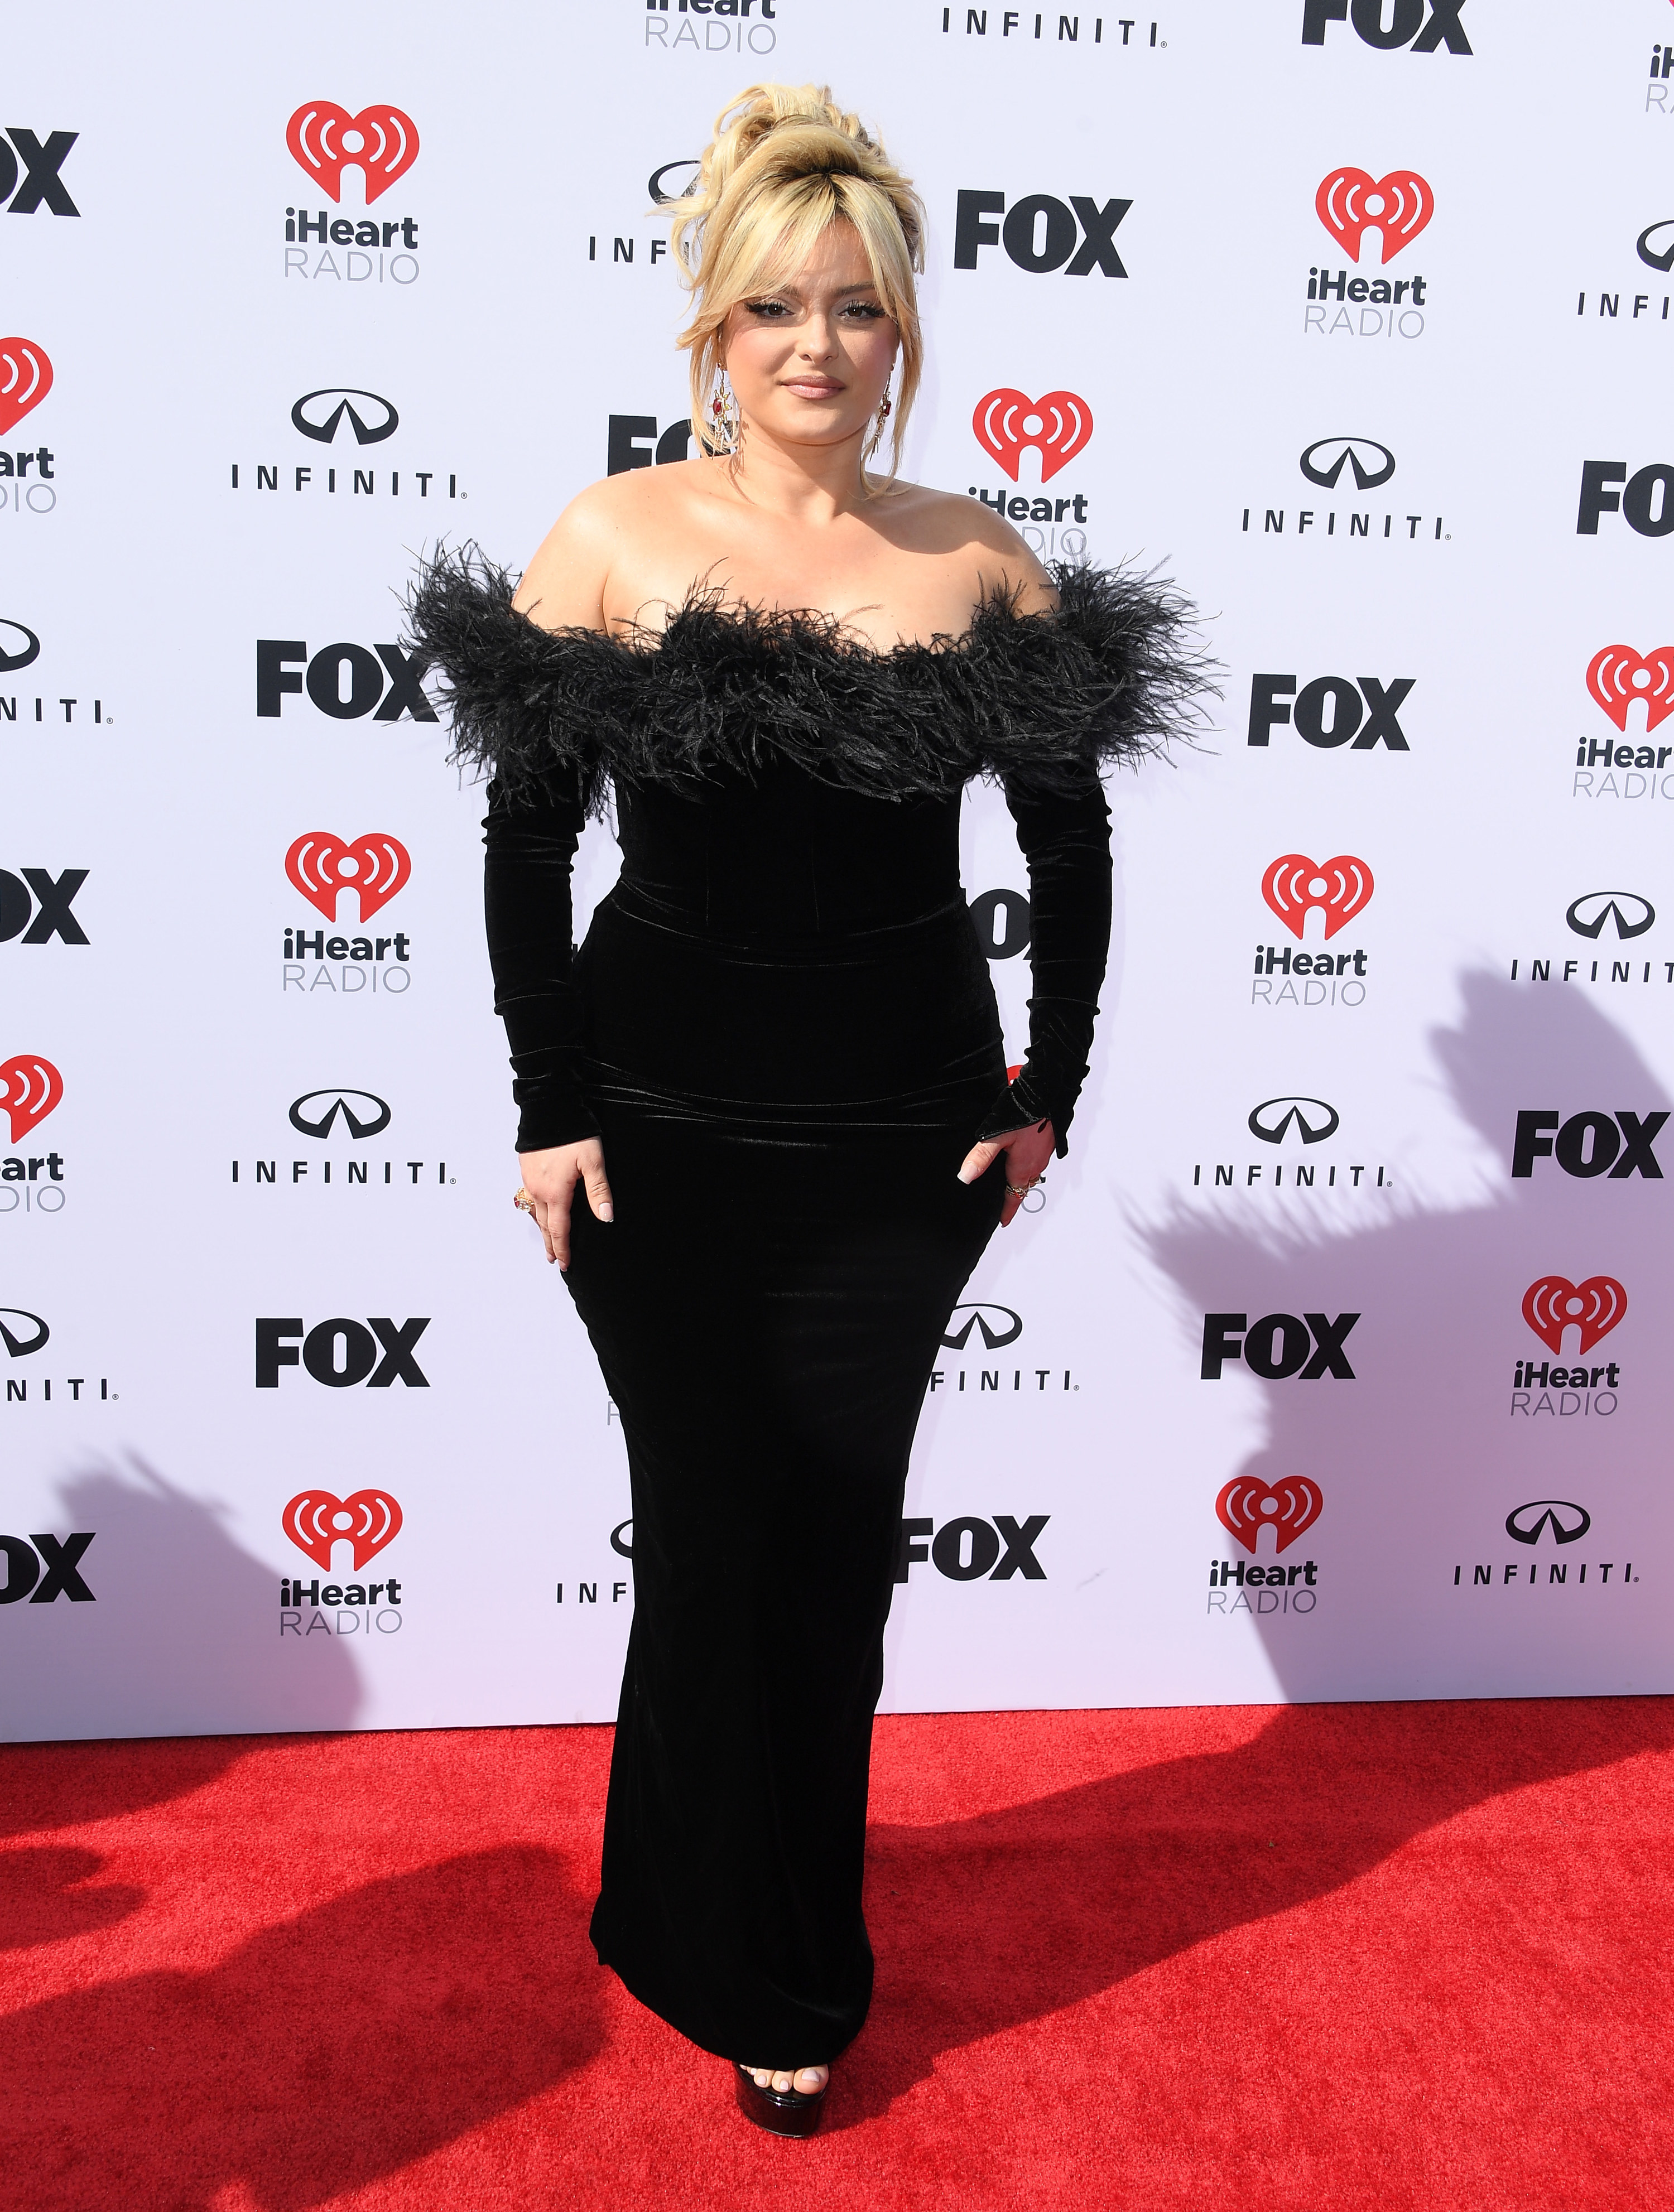 Bebe Rexha on the red carpet in an off-the-shoulder gown with feathers